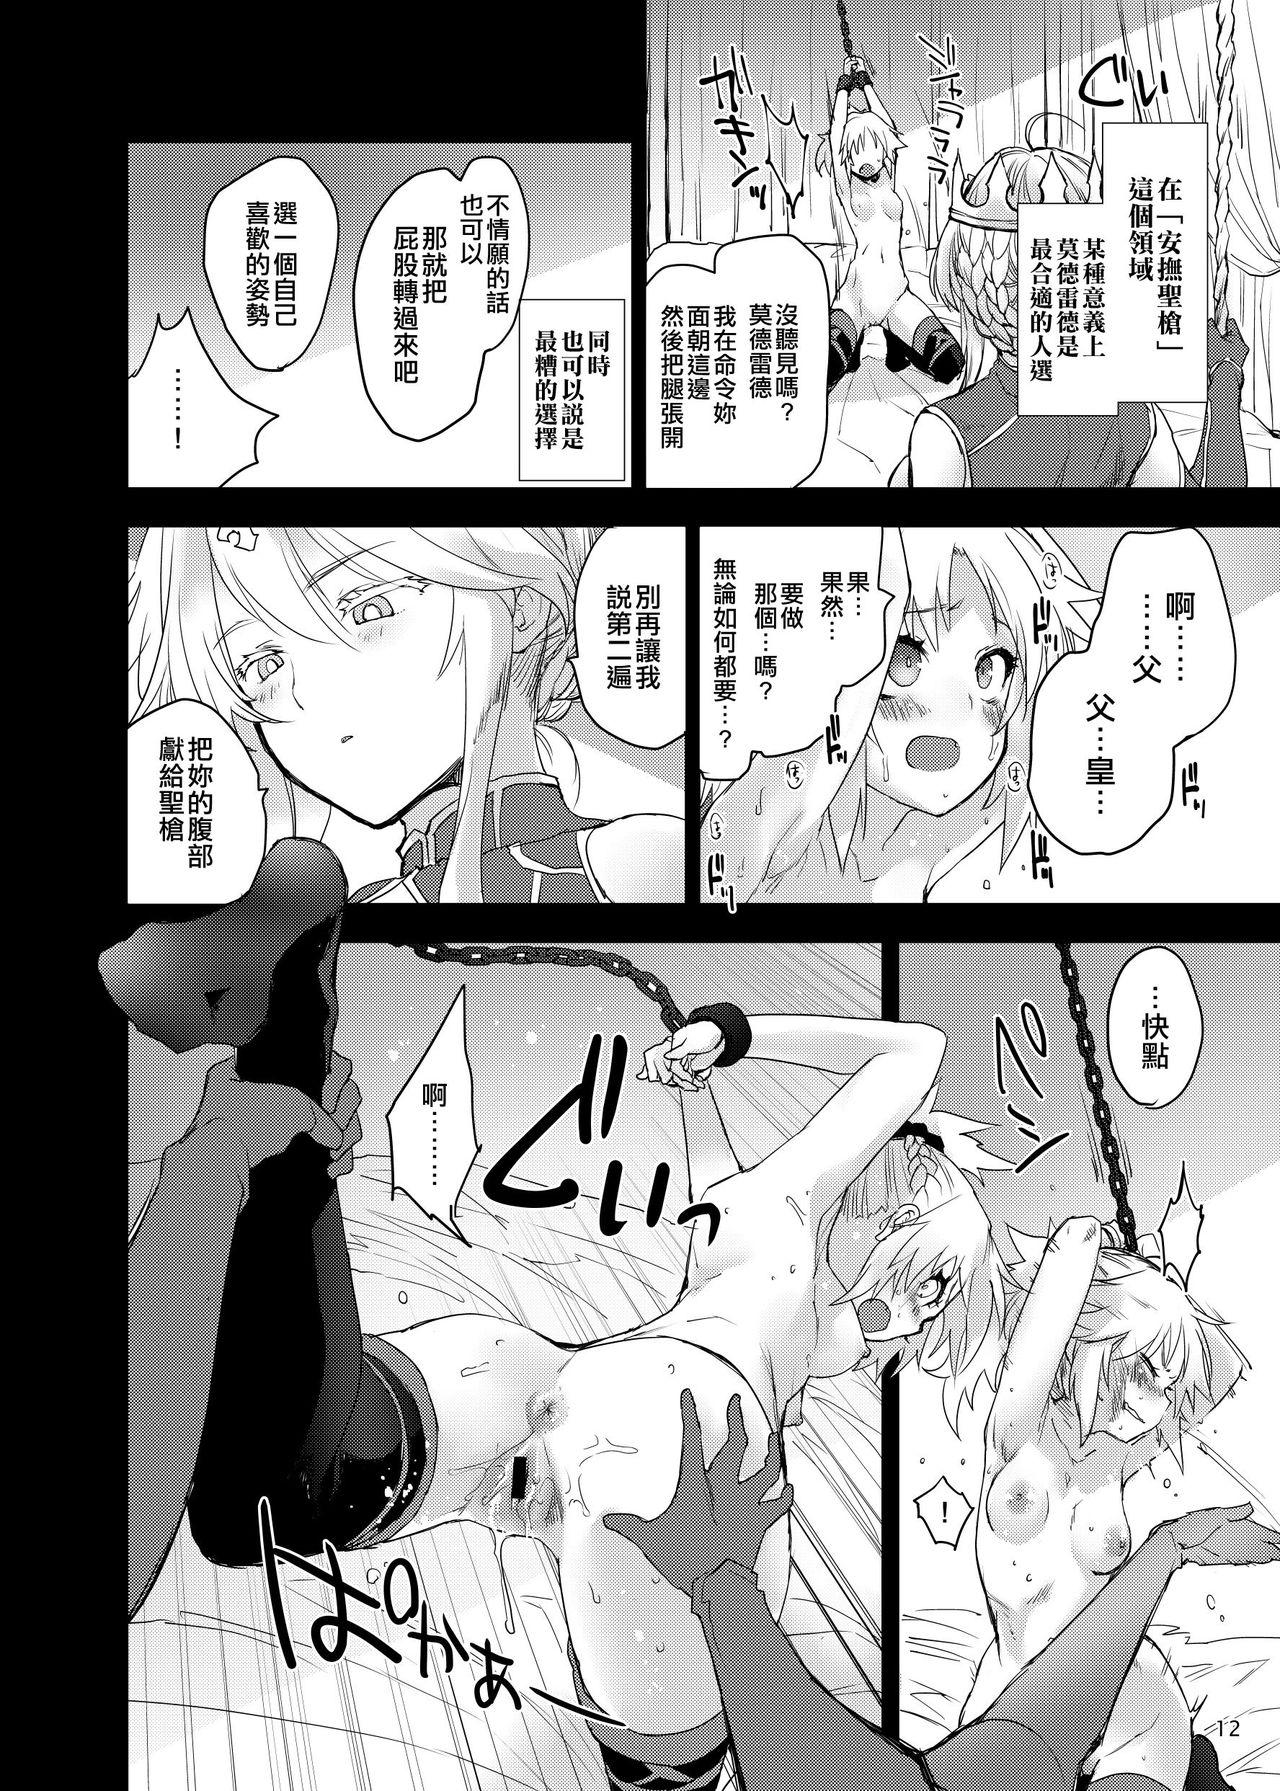 Cheating Wife "Seisou" Batsubyou - Fate grand order Pija - Page 12